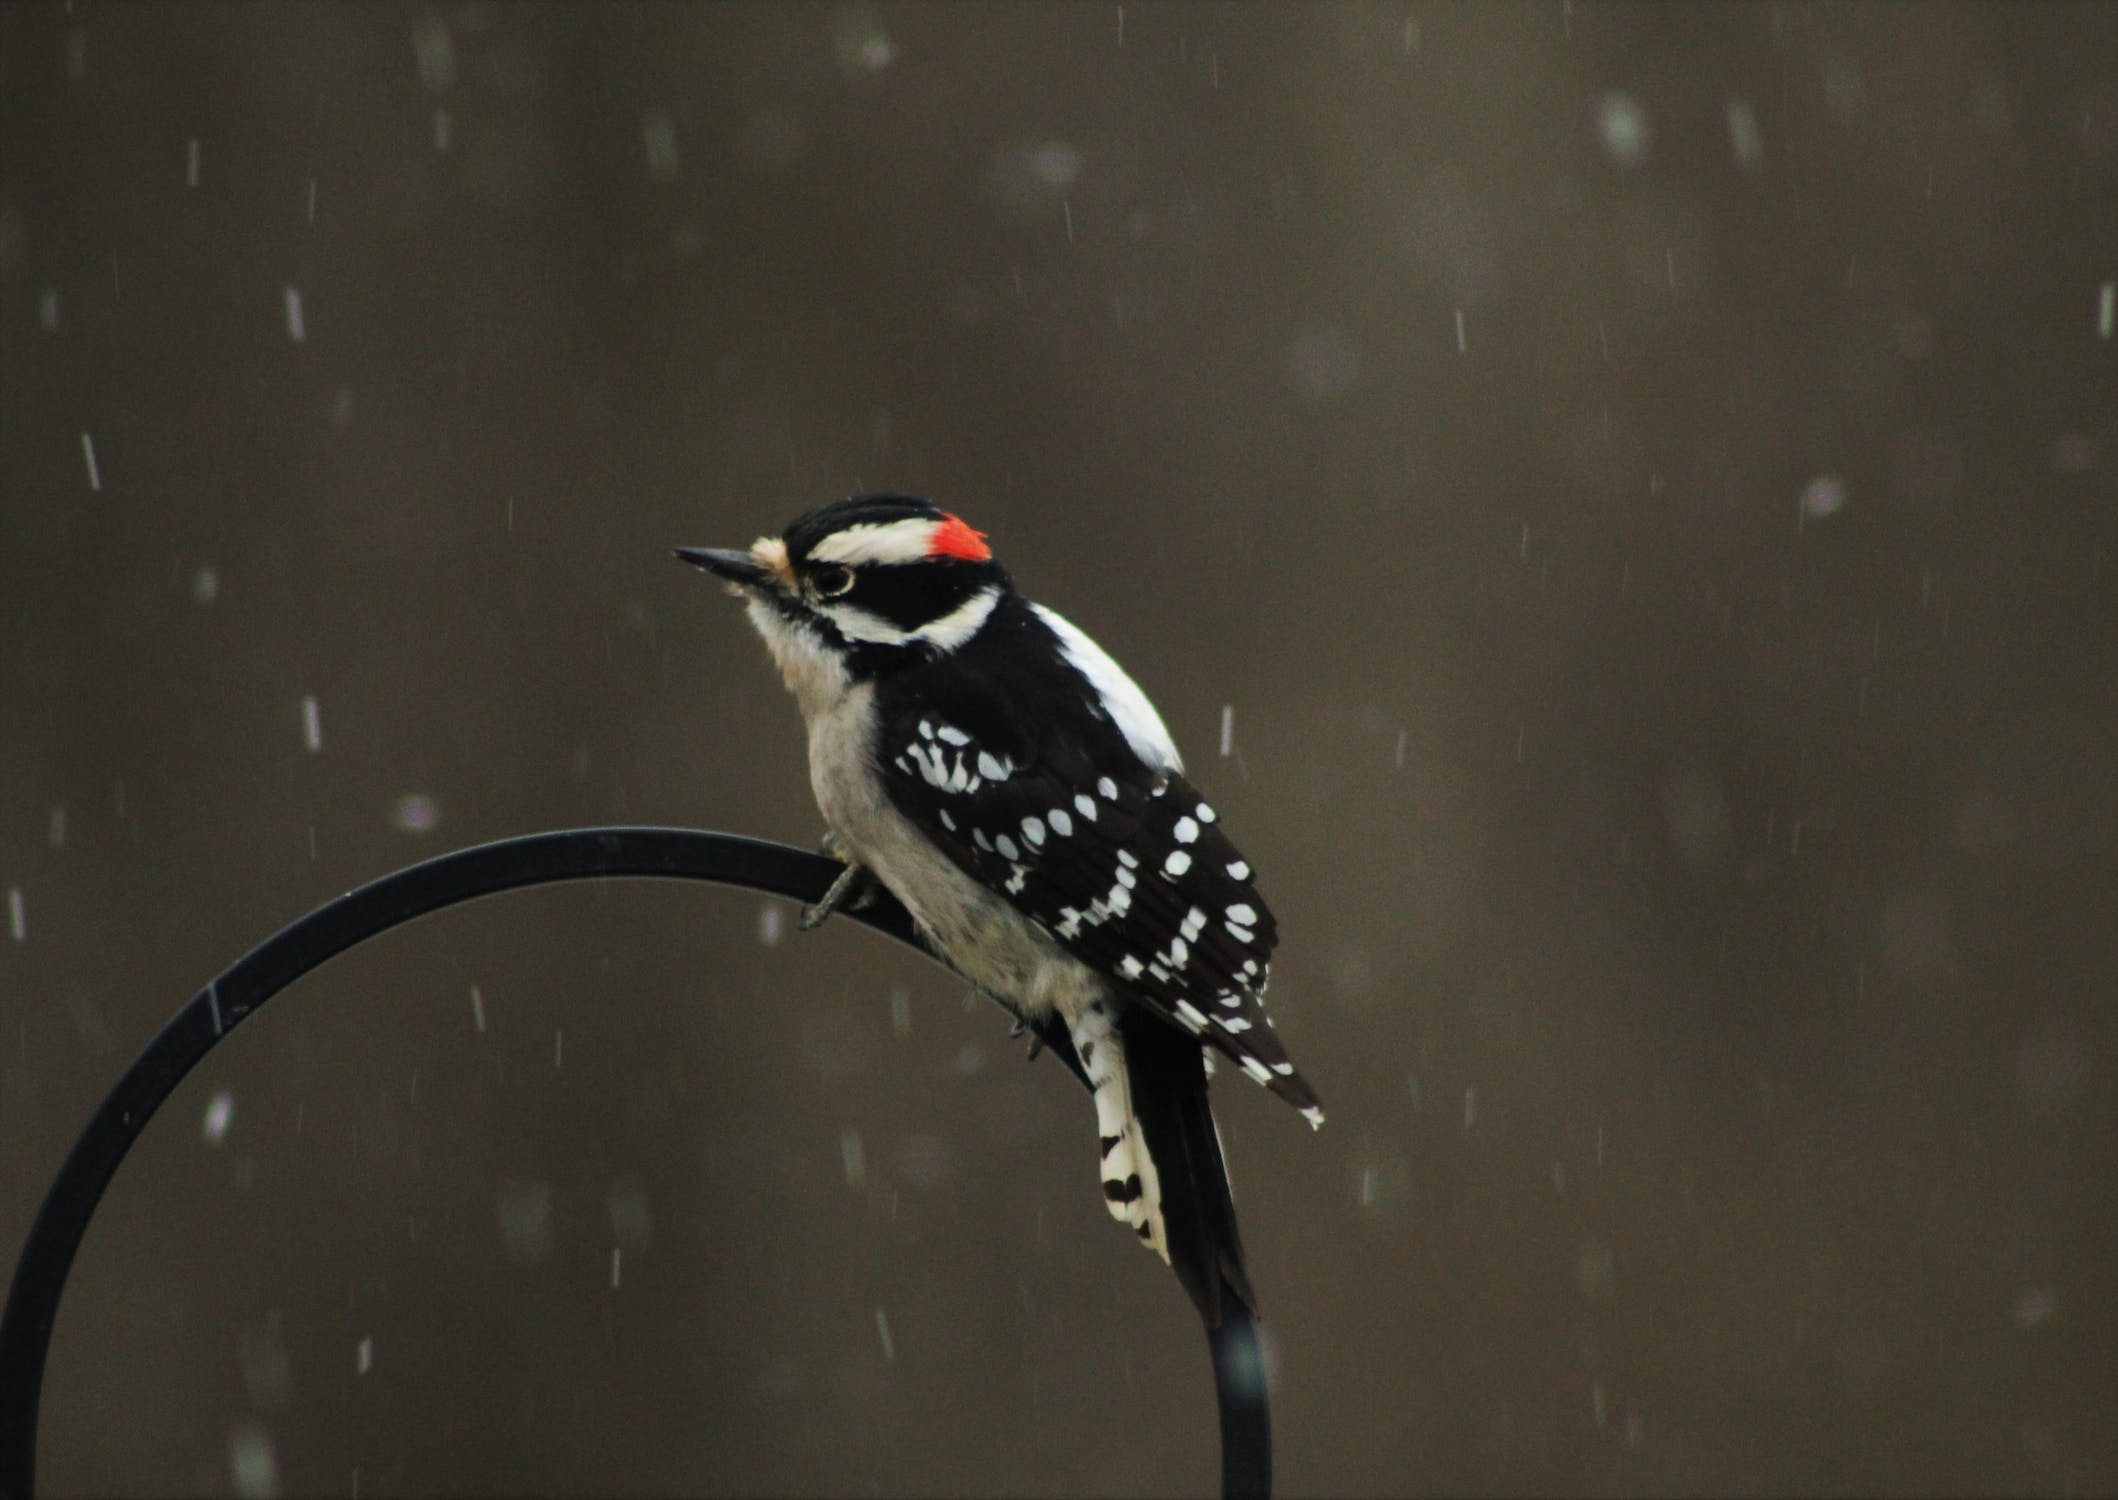 Photo of a tiny woodpecker with black & white wings and head. There is a bit of red on the head